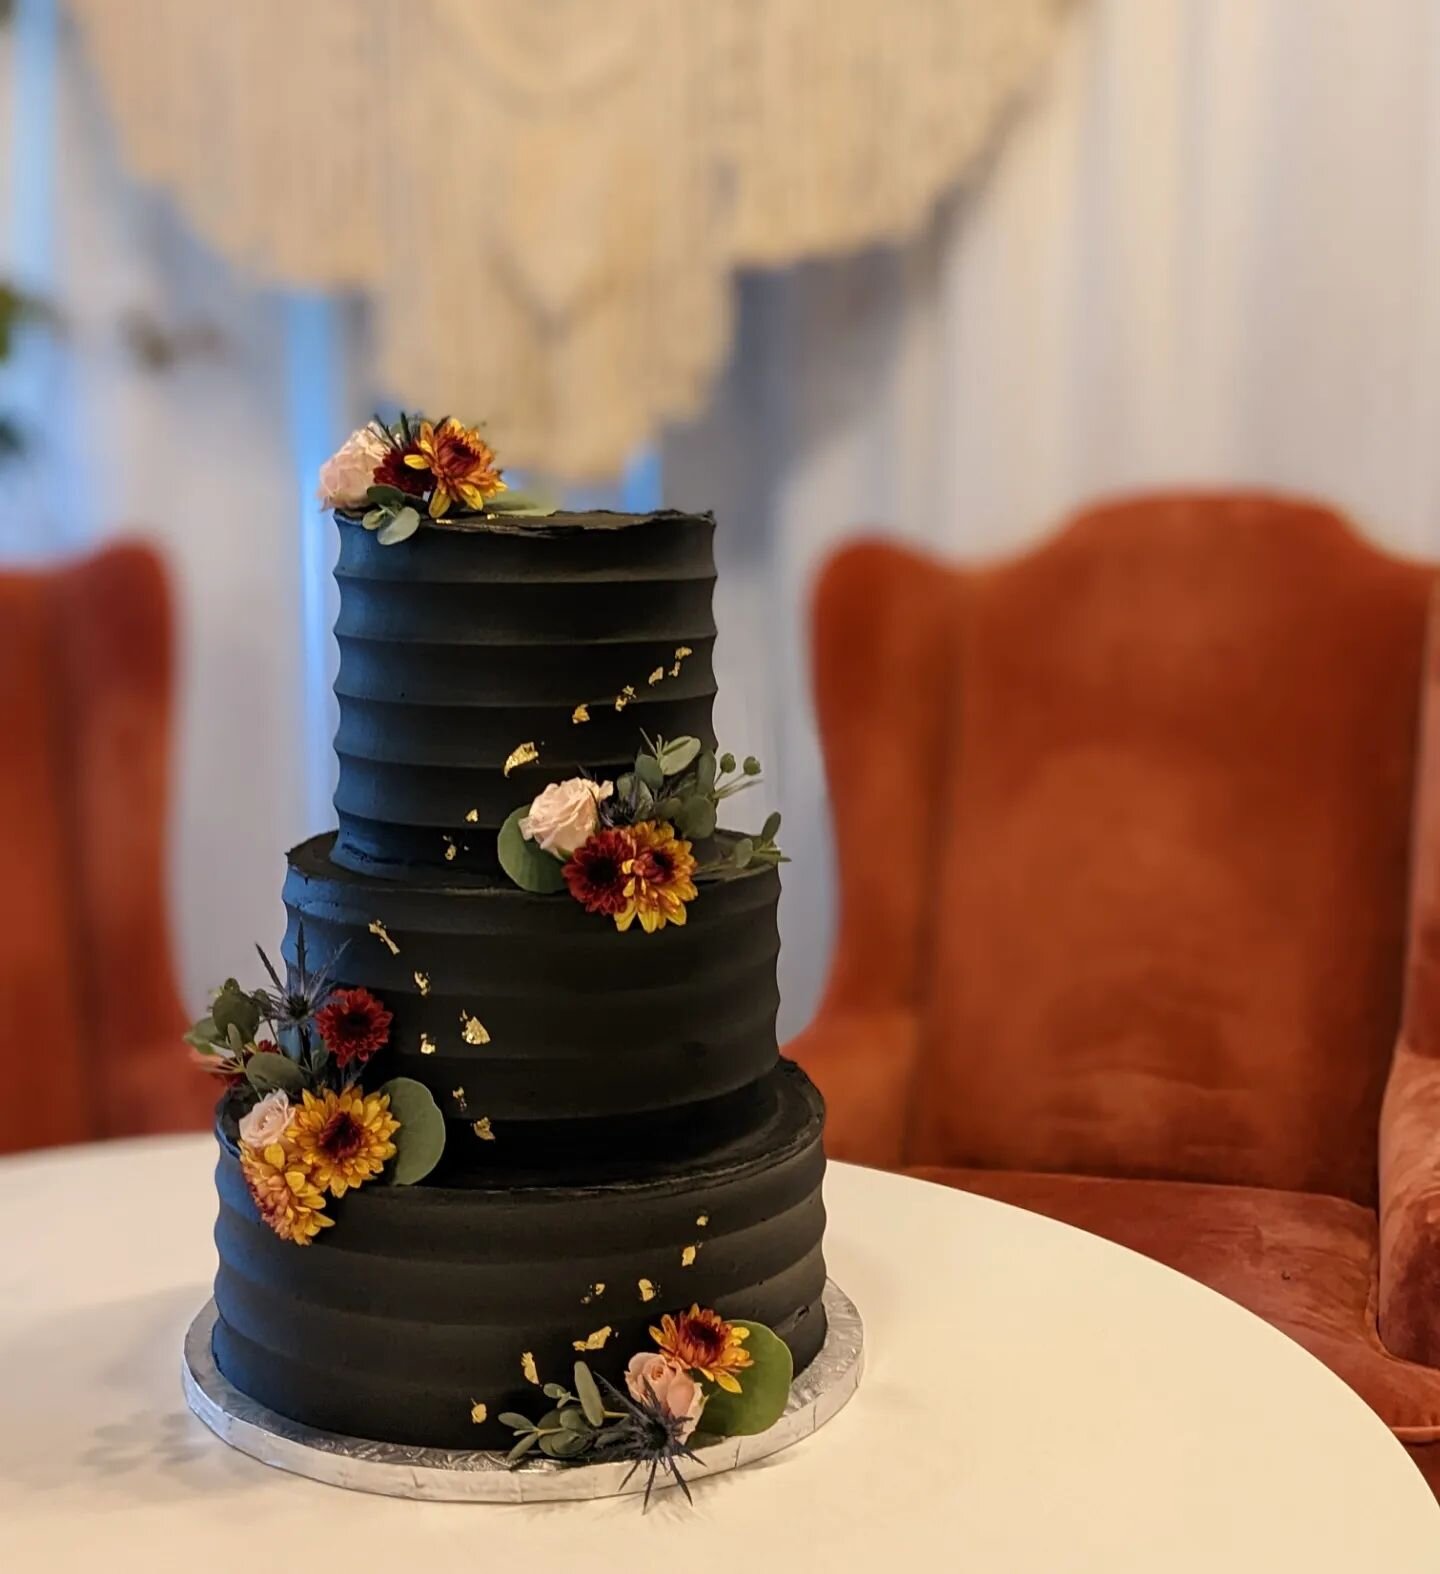 One of my favourite wedding cakes till date 🖤 the fall colour scheme and richness of the dark frosting made for something truly magical ✨ this was also my longest delivery for a wedding, 2 hours away! 
.
.
.
.
.
#weddingcake #weddingcakes #novascoti